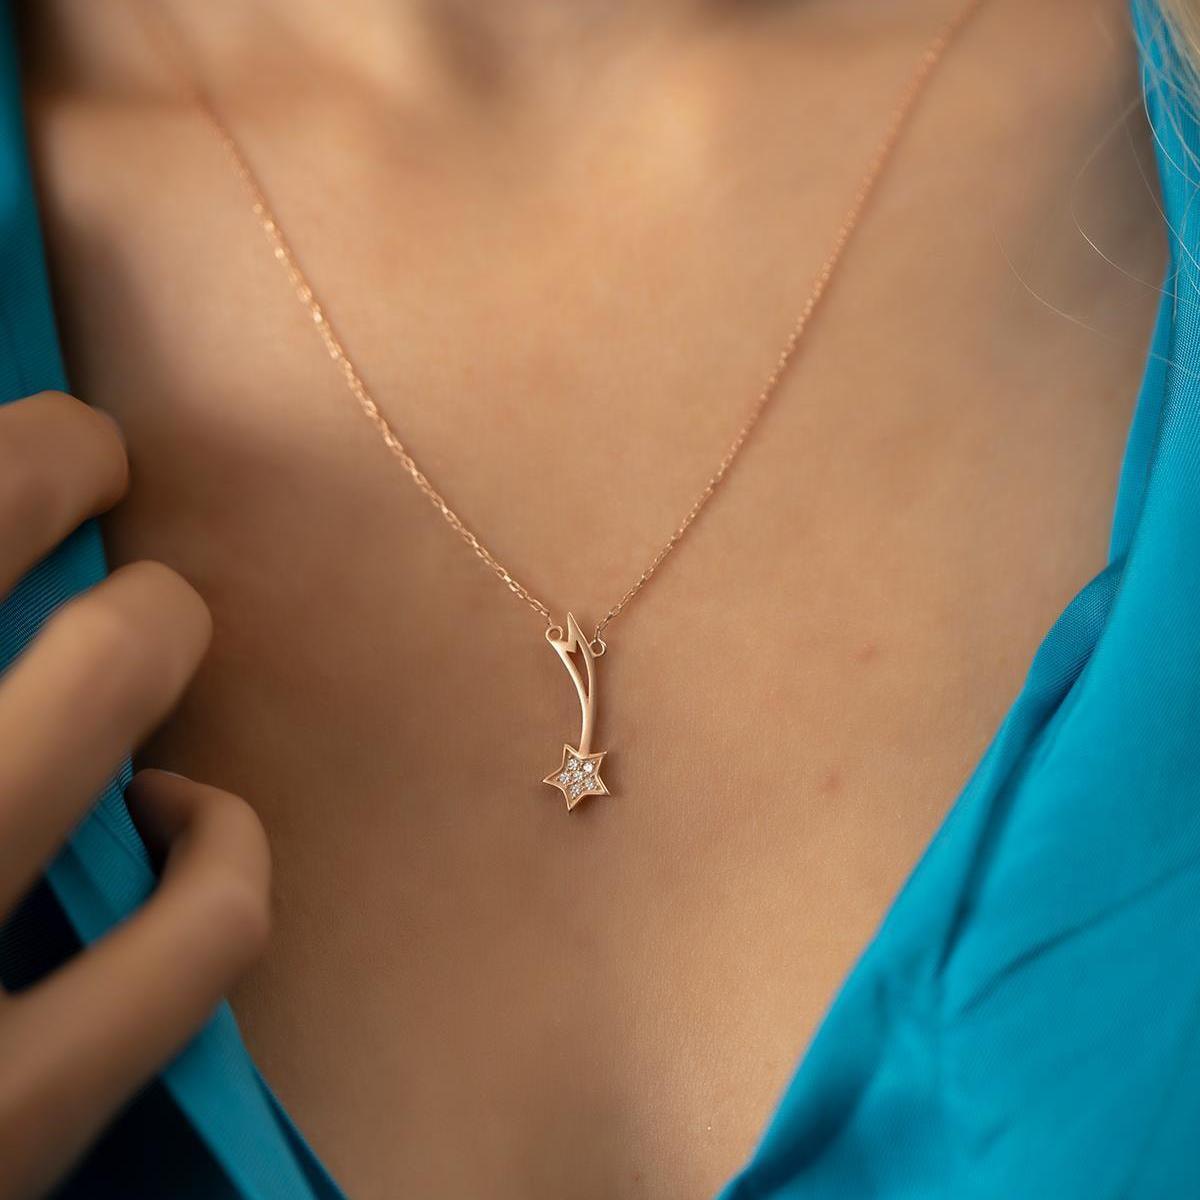 Halley's Comet Necklace • Meteorite Necklace • Star Necklace Rose Gold - Trending Silver Gifts